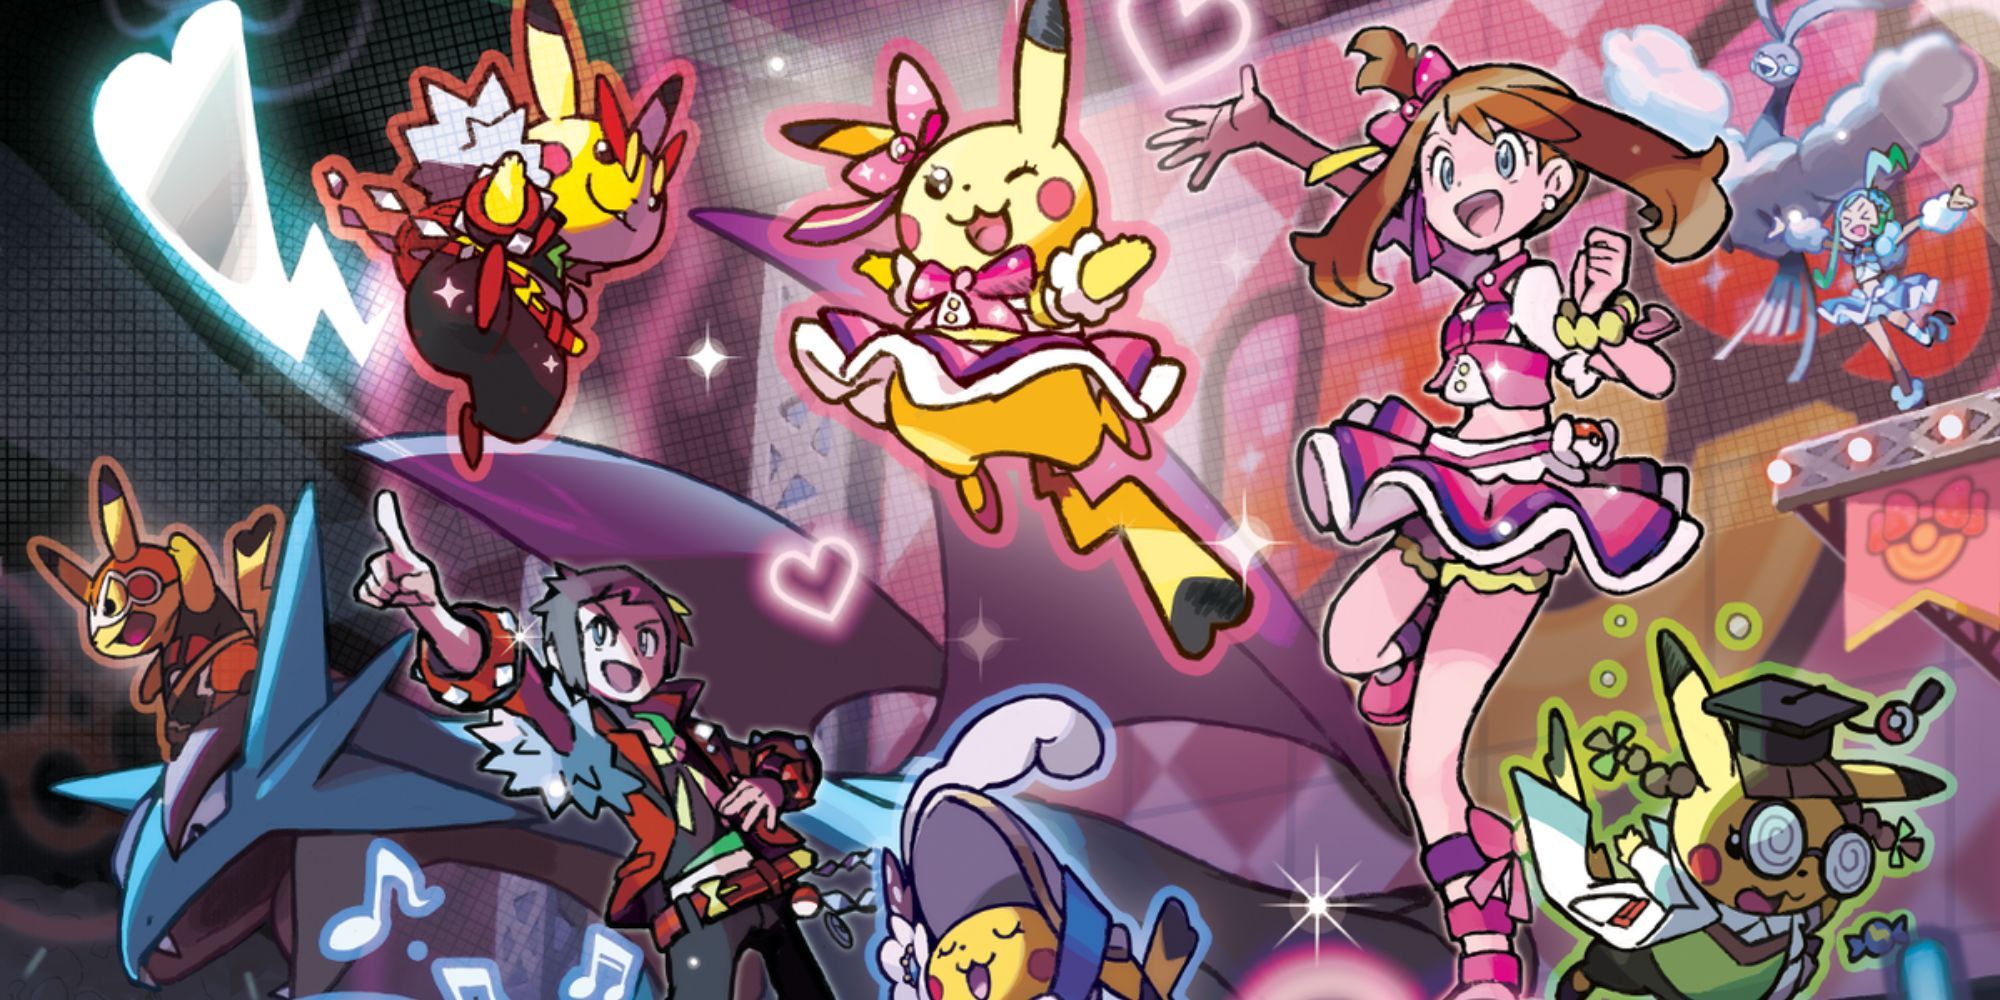 Official art of Brendan, May and the cosplay Pikachu in a Pokemon contest.